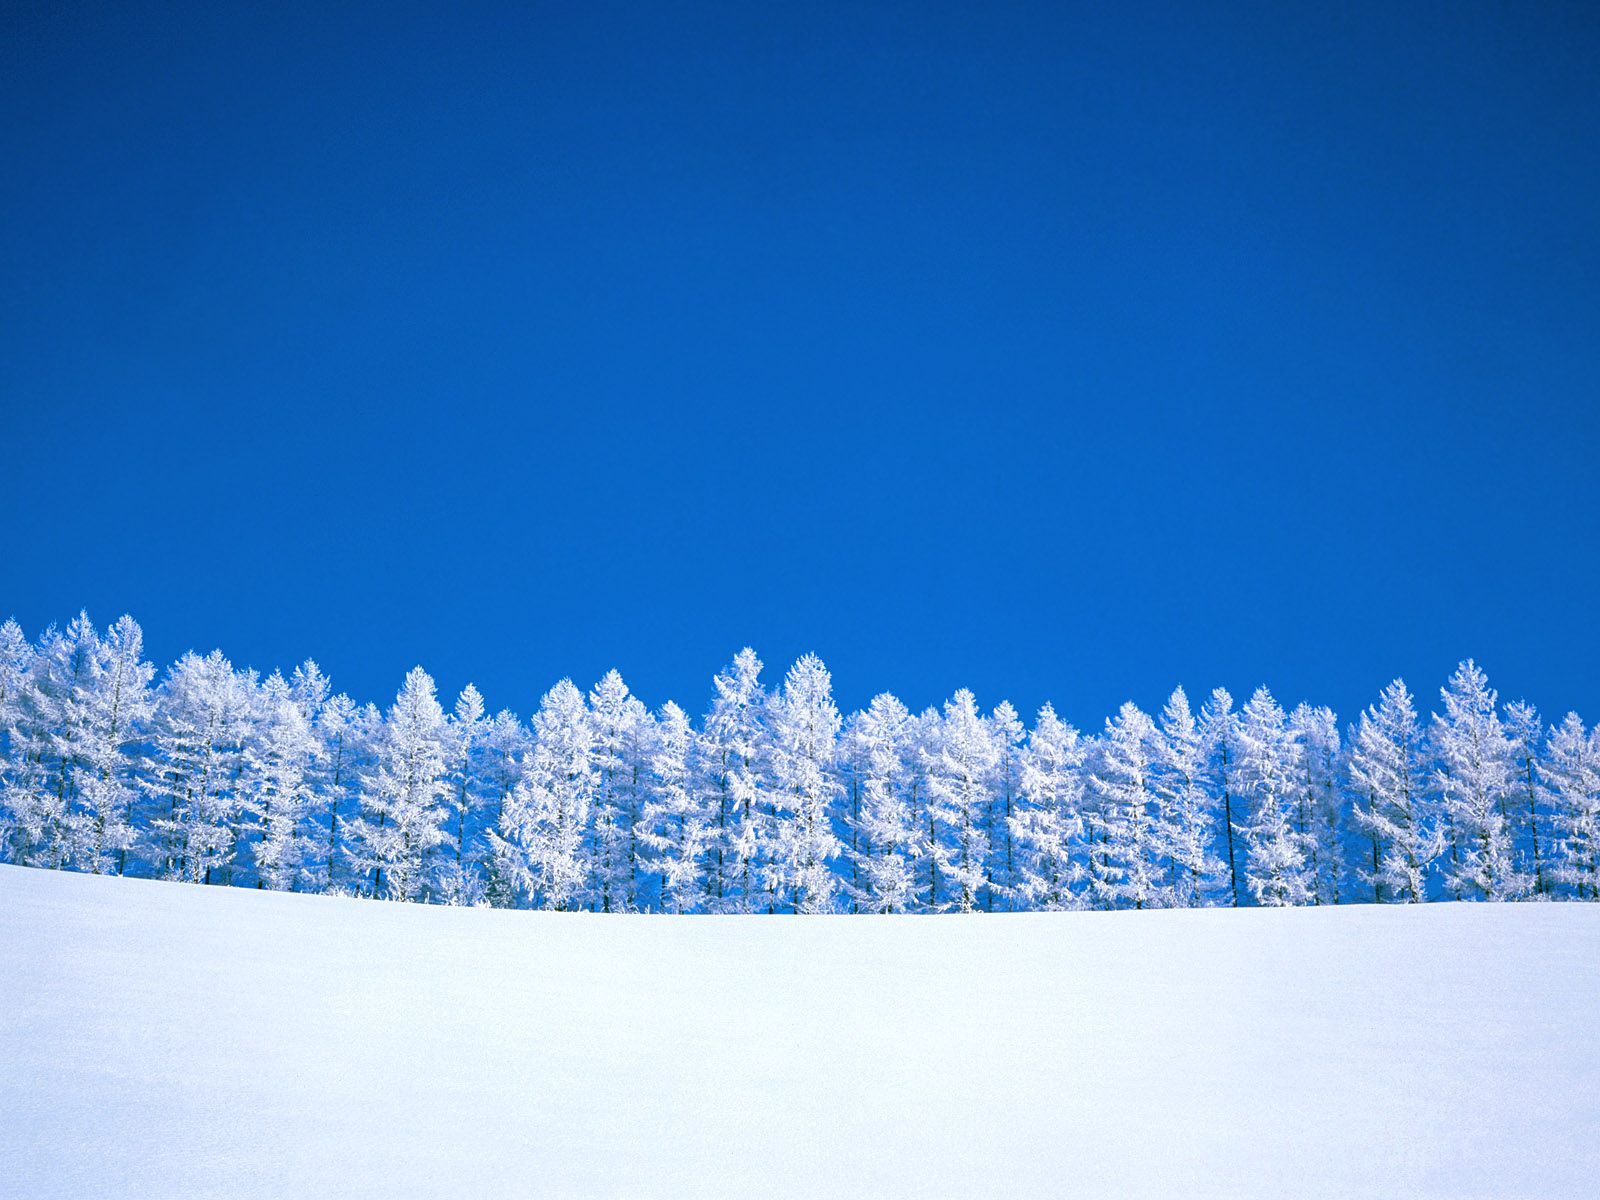 Winter Snowfull HD Nature Background Wallpaper For Laptop Widescreen